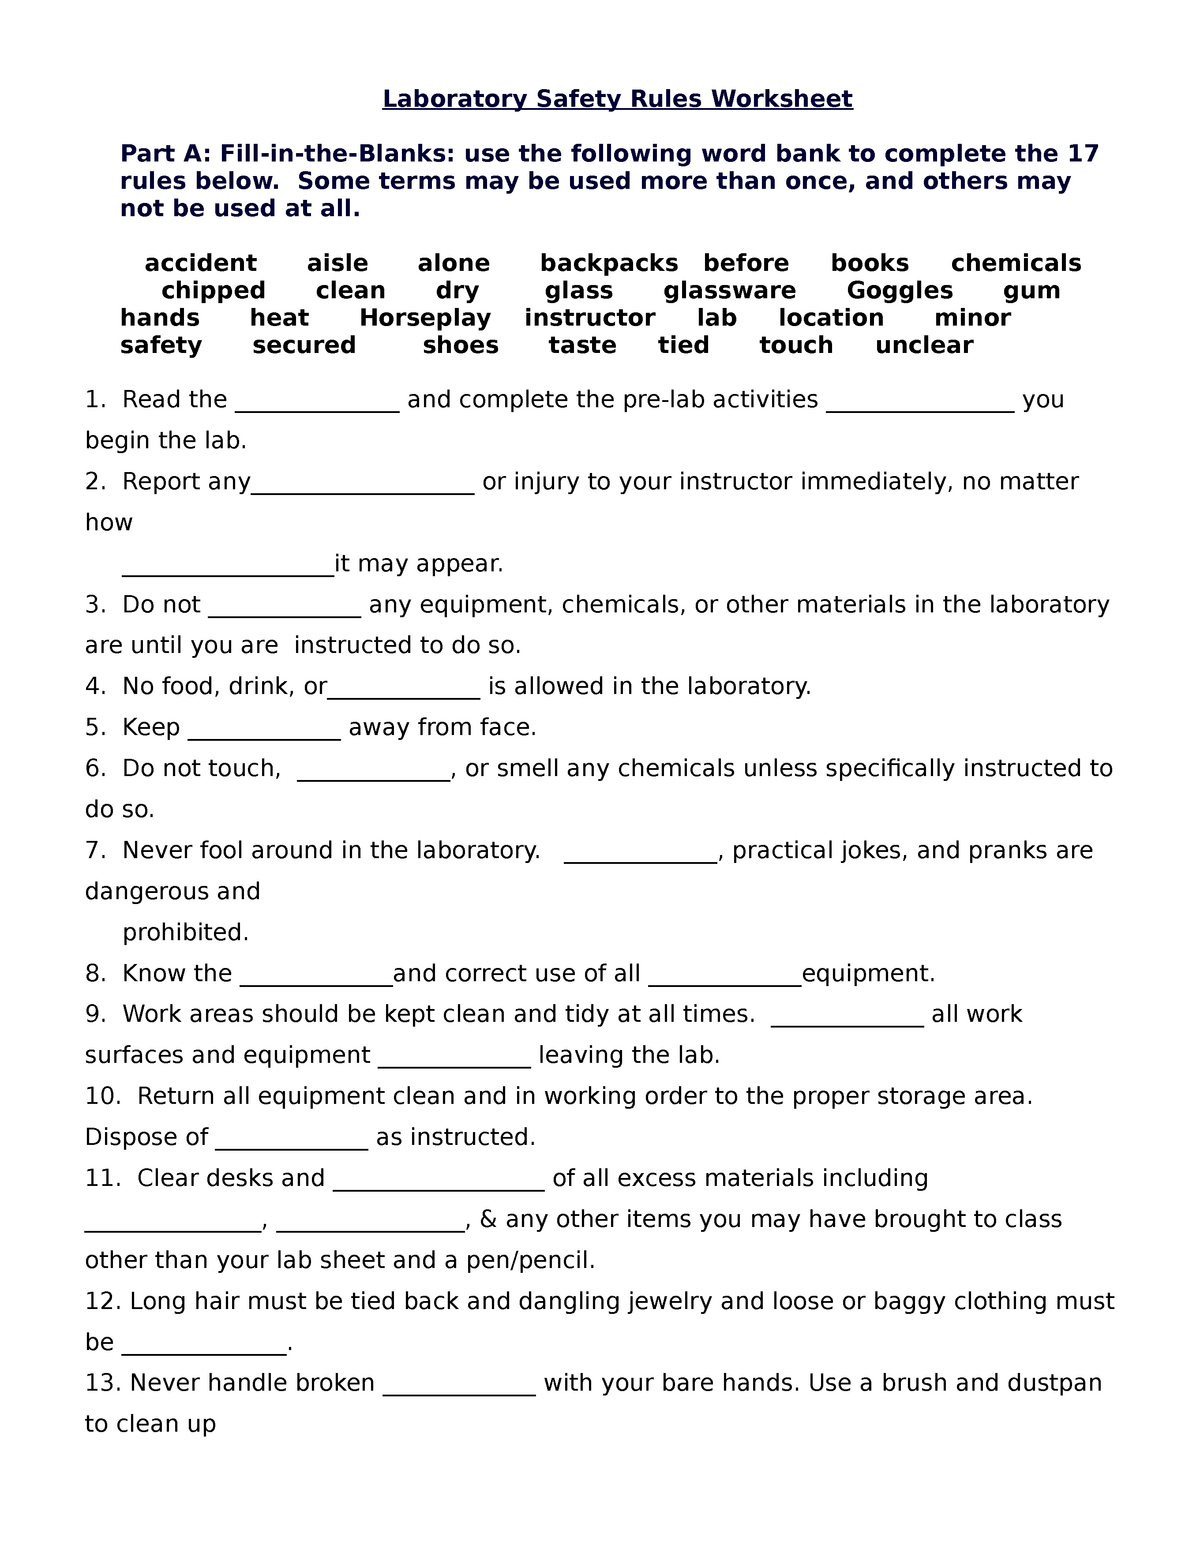 Safety Rules Fill in the blank - Laboratory Safety Rules Worksheet In Lab Safety Worksheet Answer Key